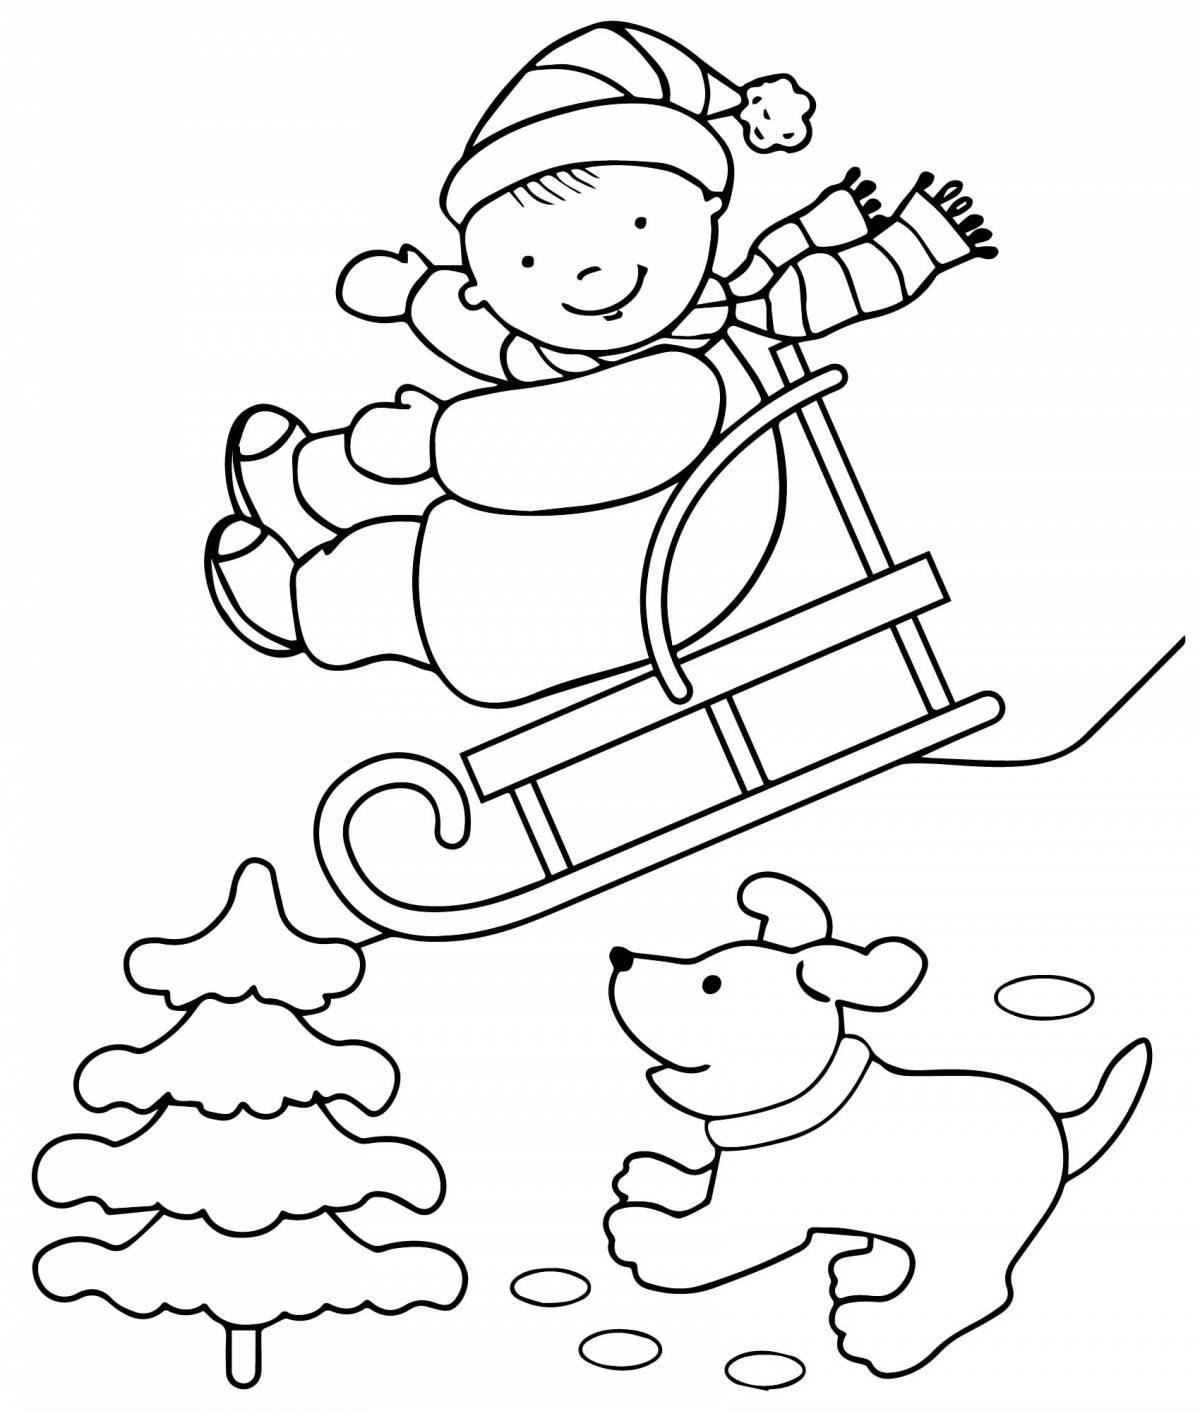 Amazing winter coloring book for kids 3-4 years old